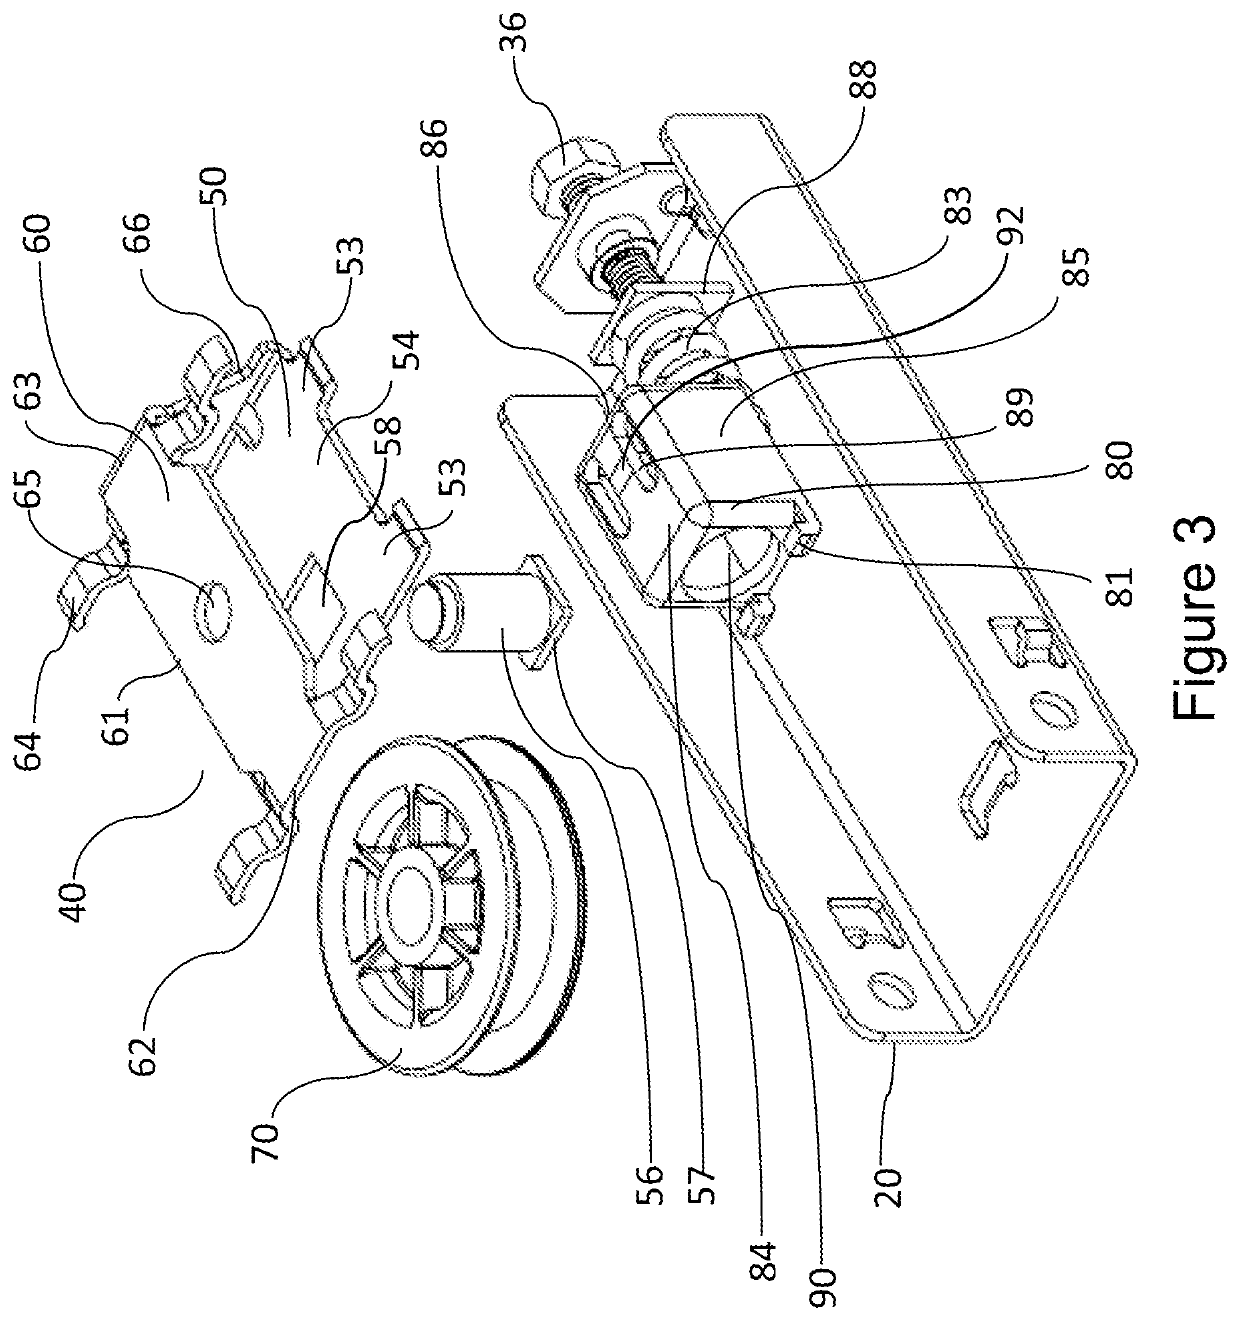 Tensioning device for a drive train